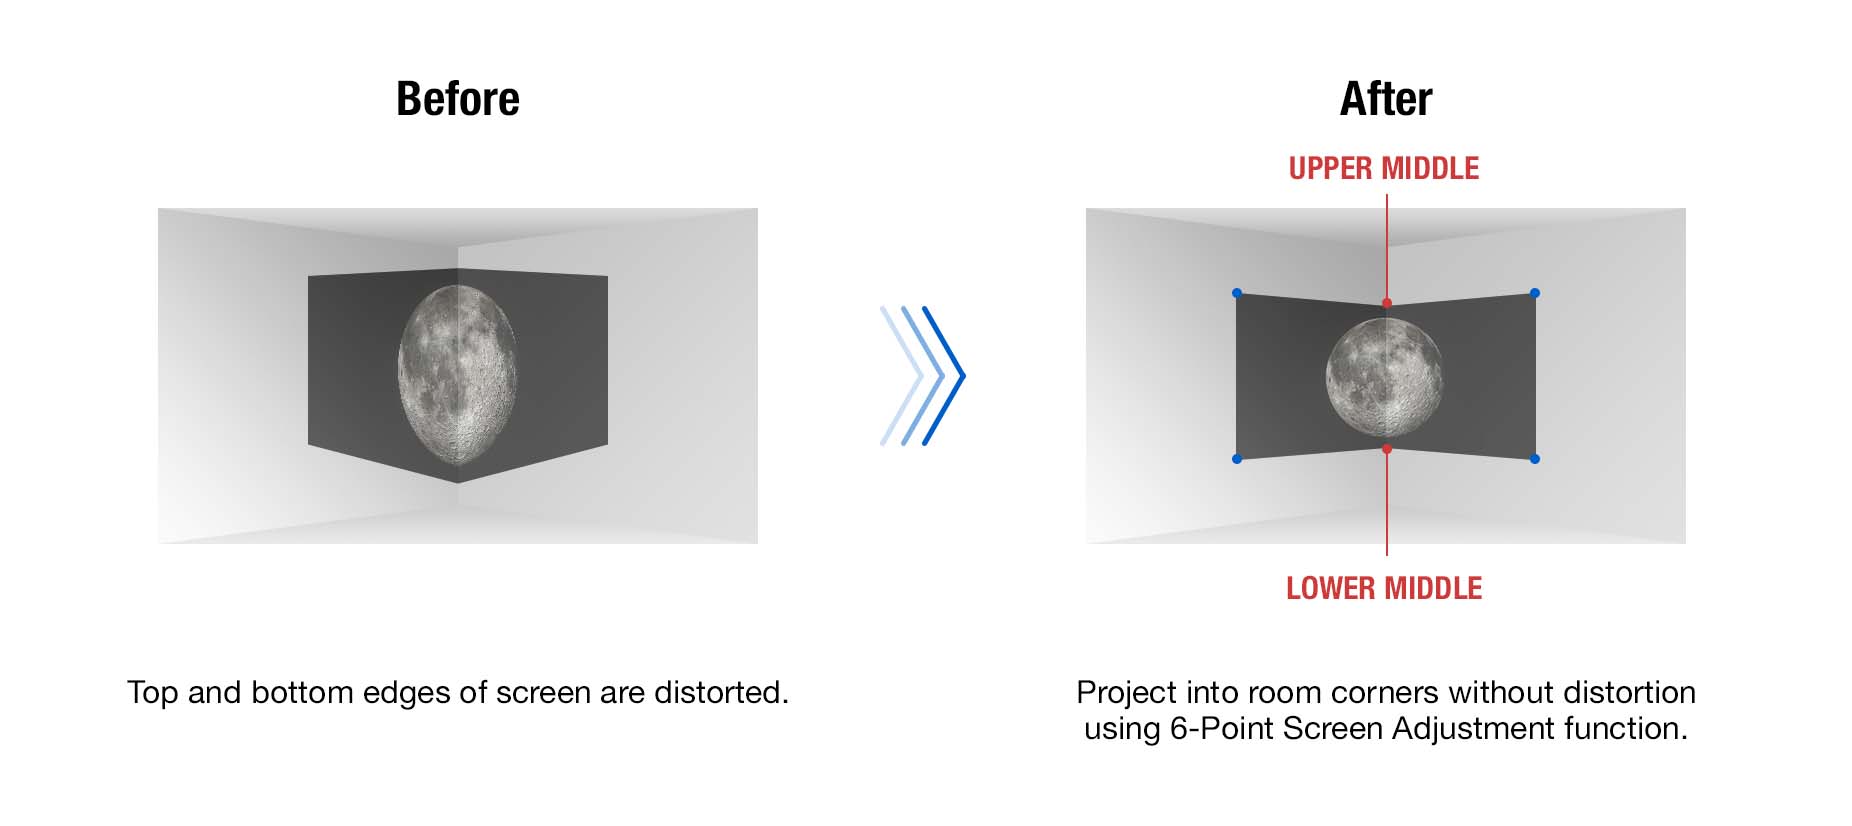 New 6-Point Screen Adjustment for Projection into Room Corners